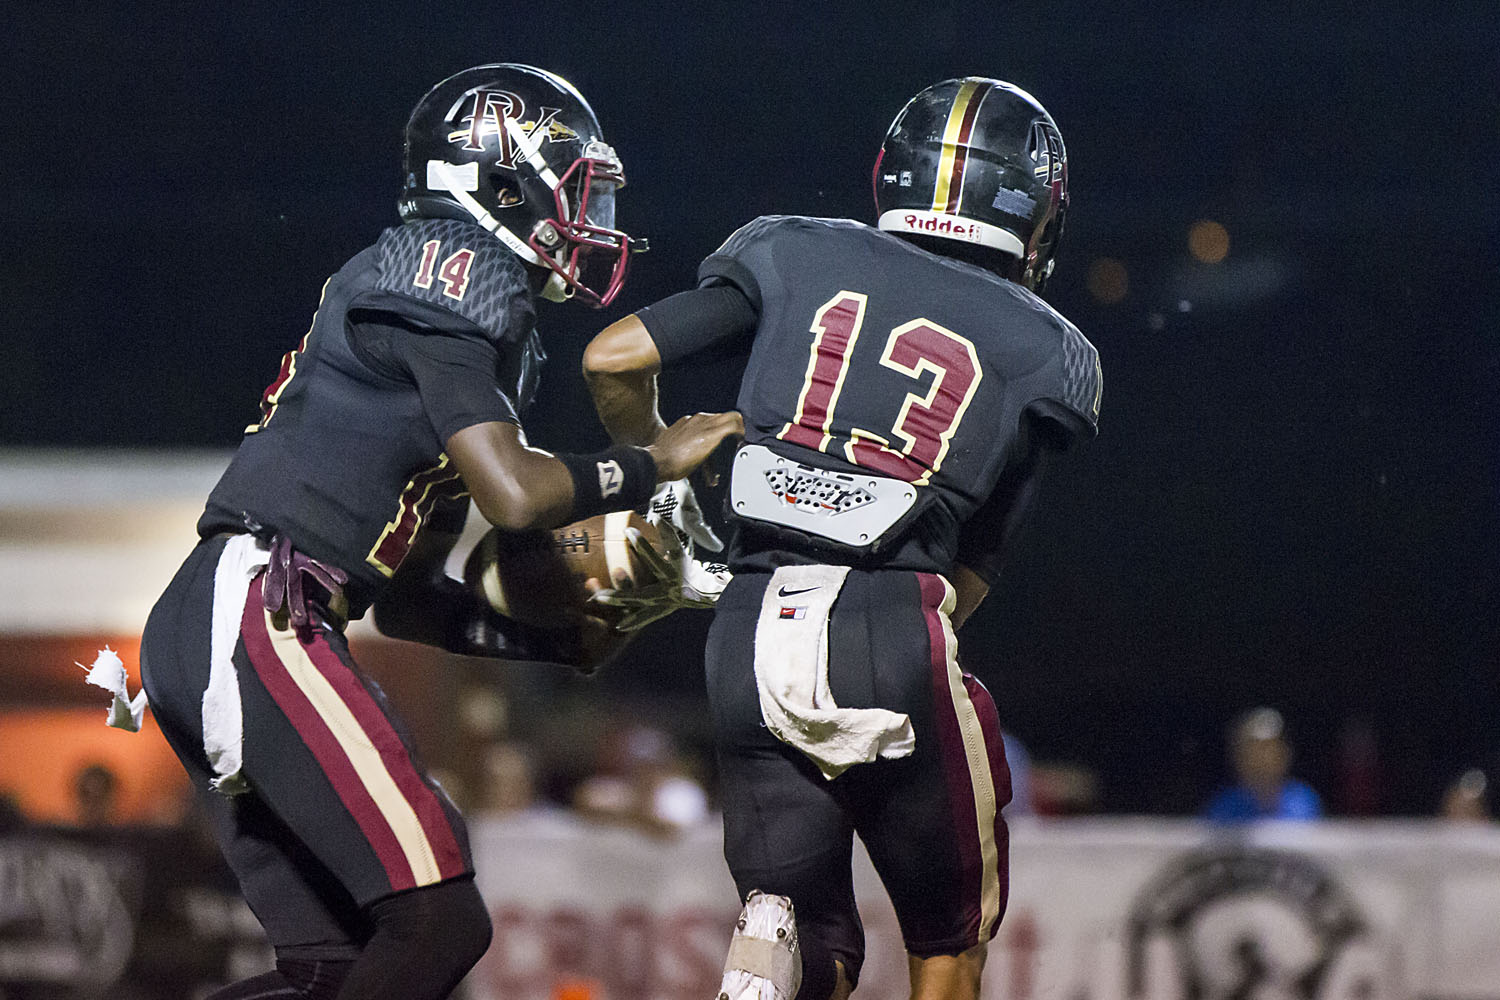 Pinson Valley returns to region play with renewed confidence